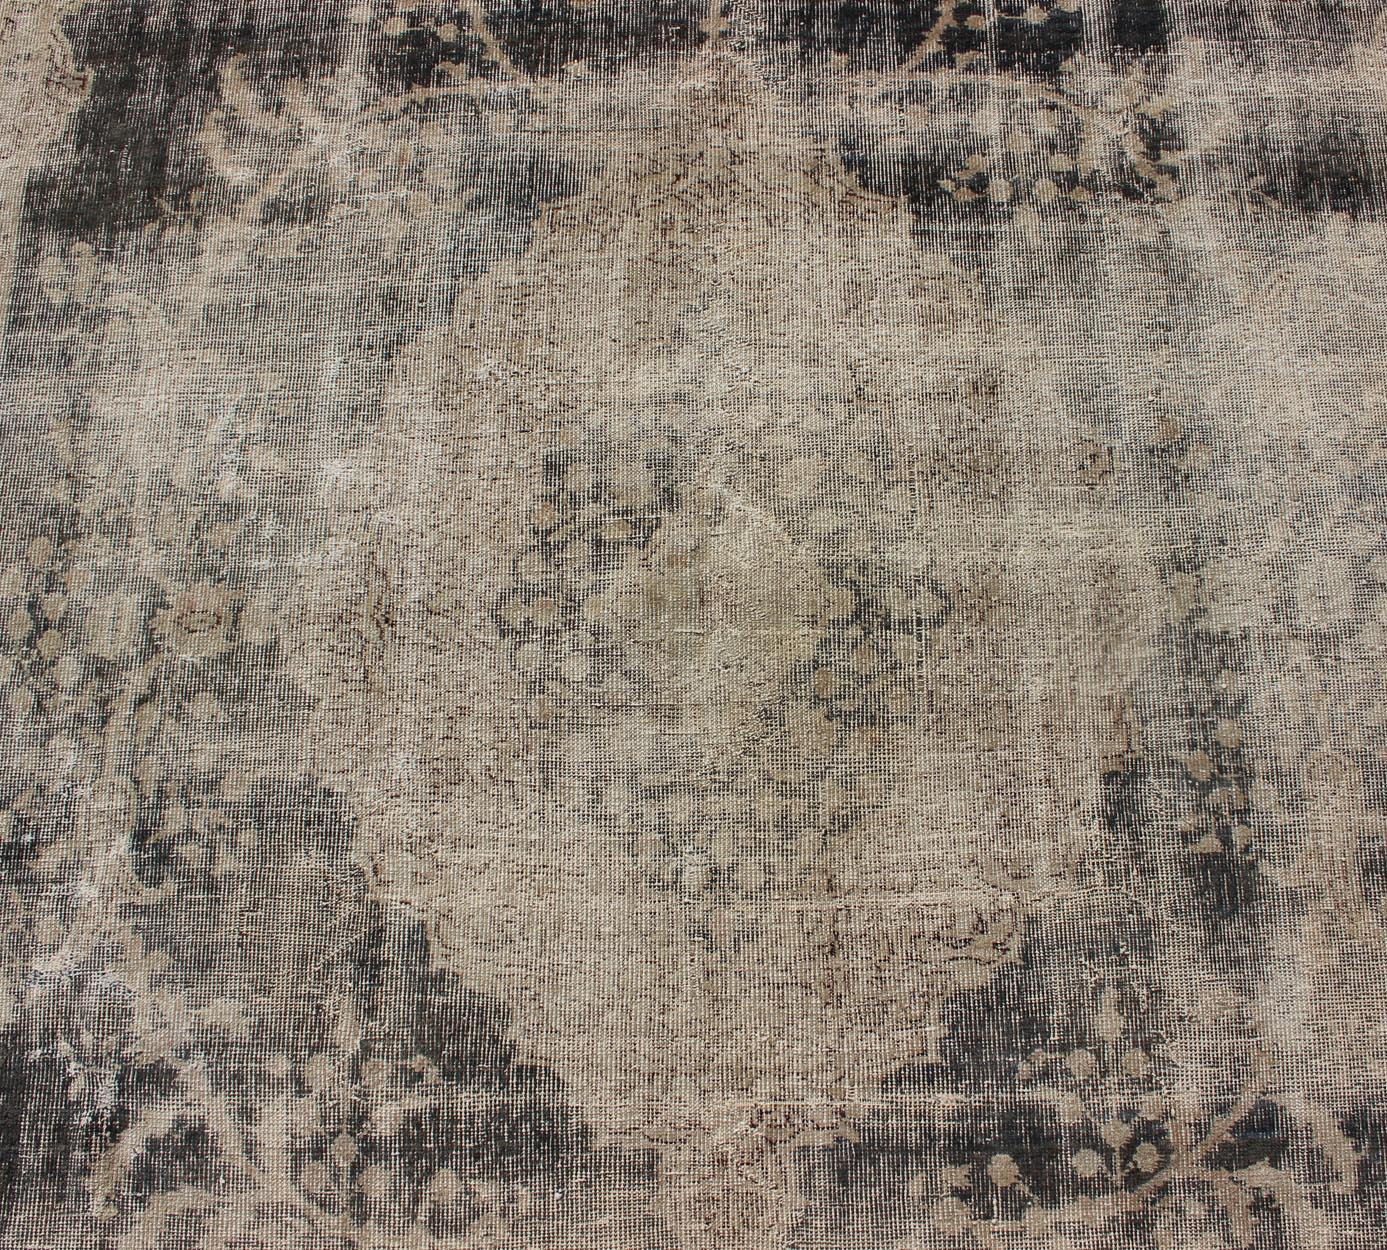 Distressed Turkish Carpet with Floral Design in Taupe, Dark Gray, and Charcoal For Sale 6